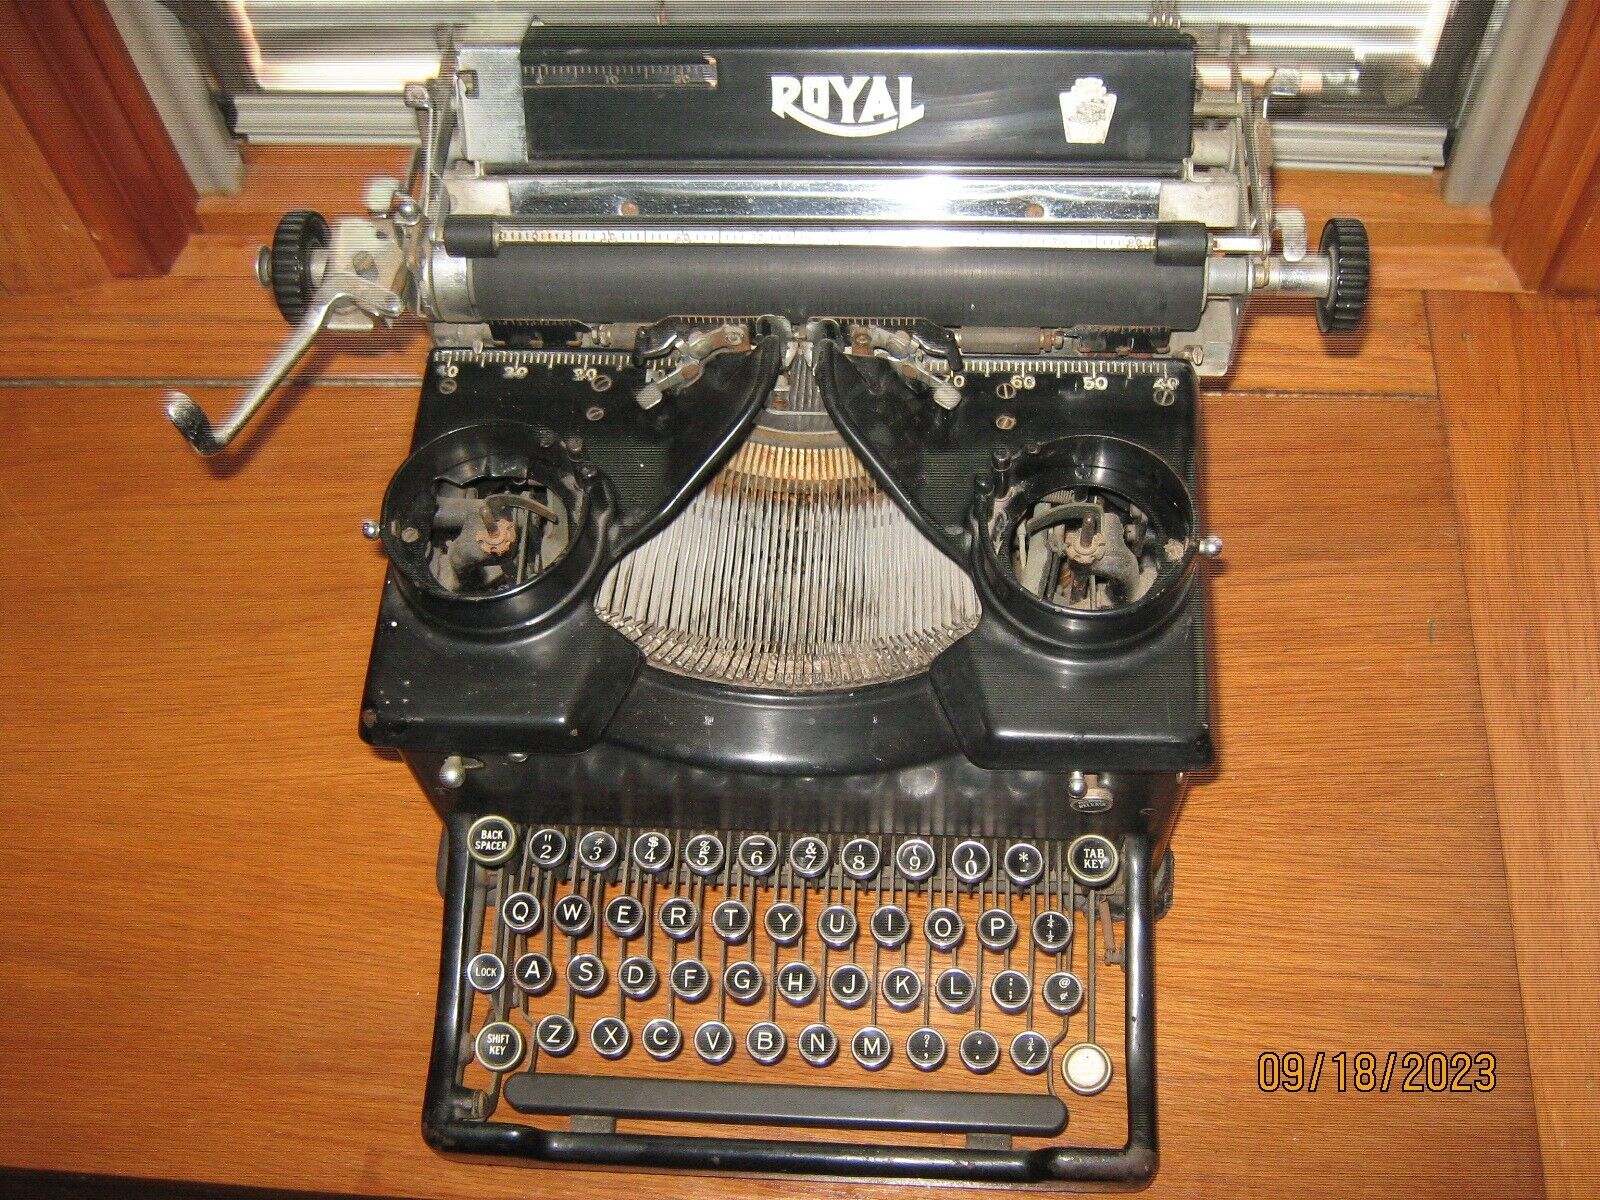 Vintage Royal no. 10 typewriter 1933 Serial number SX1566136 AS -IS PICK UP ONLY